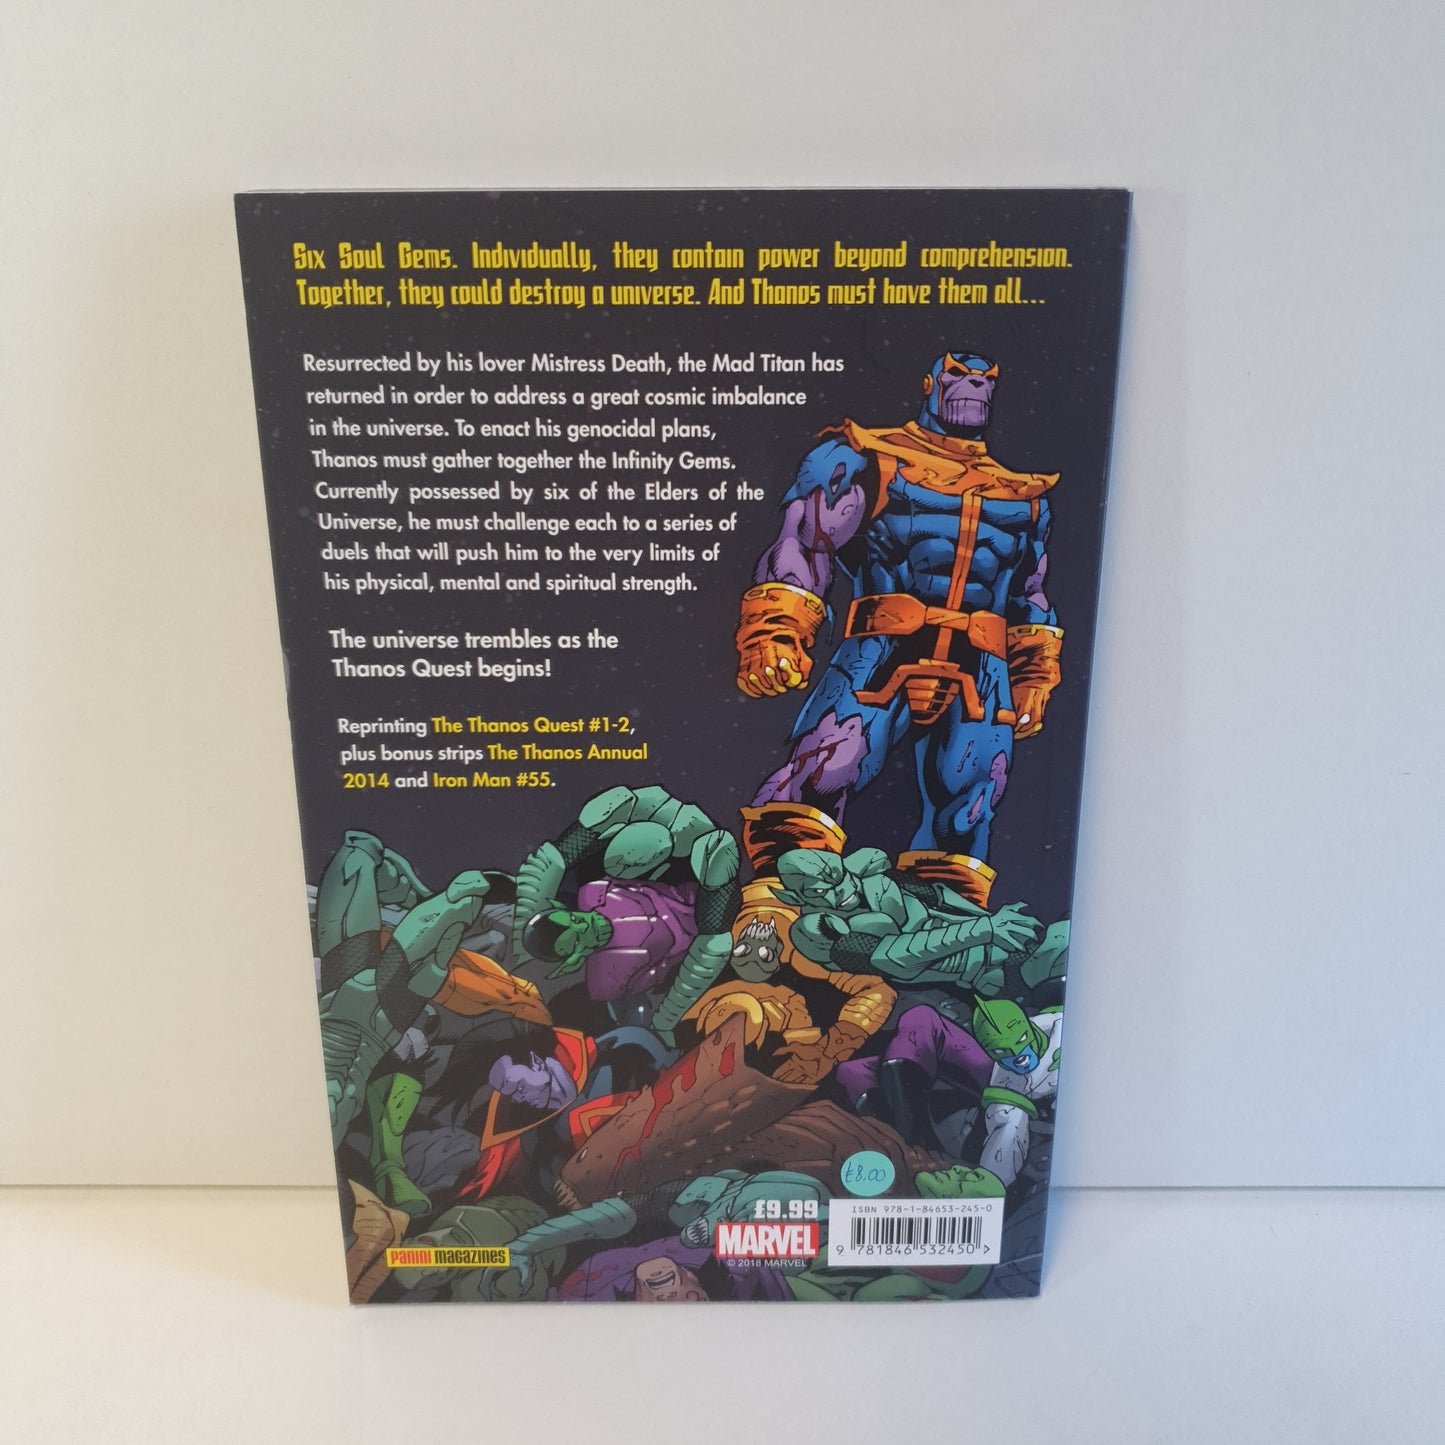 The Thanos Quest by Jim starlin & Ron Lim (2013)